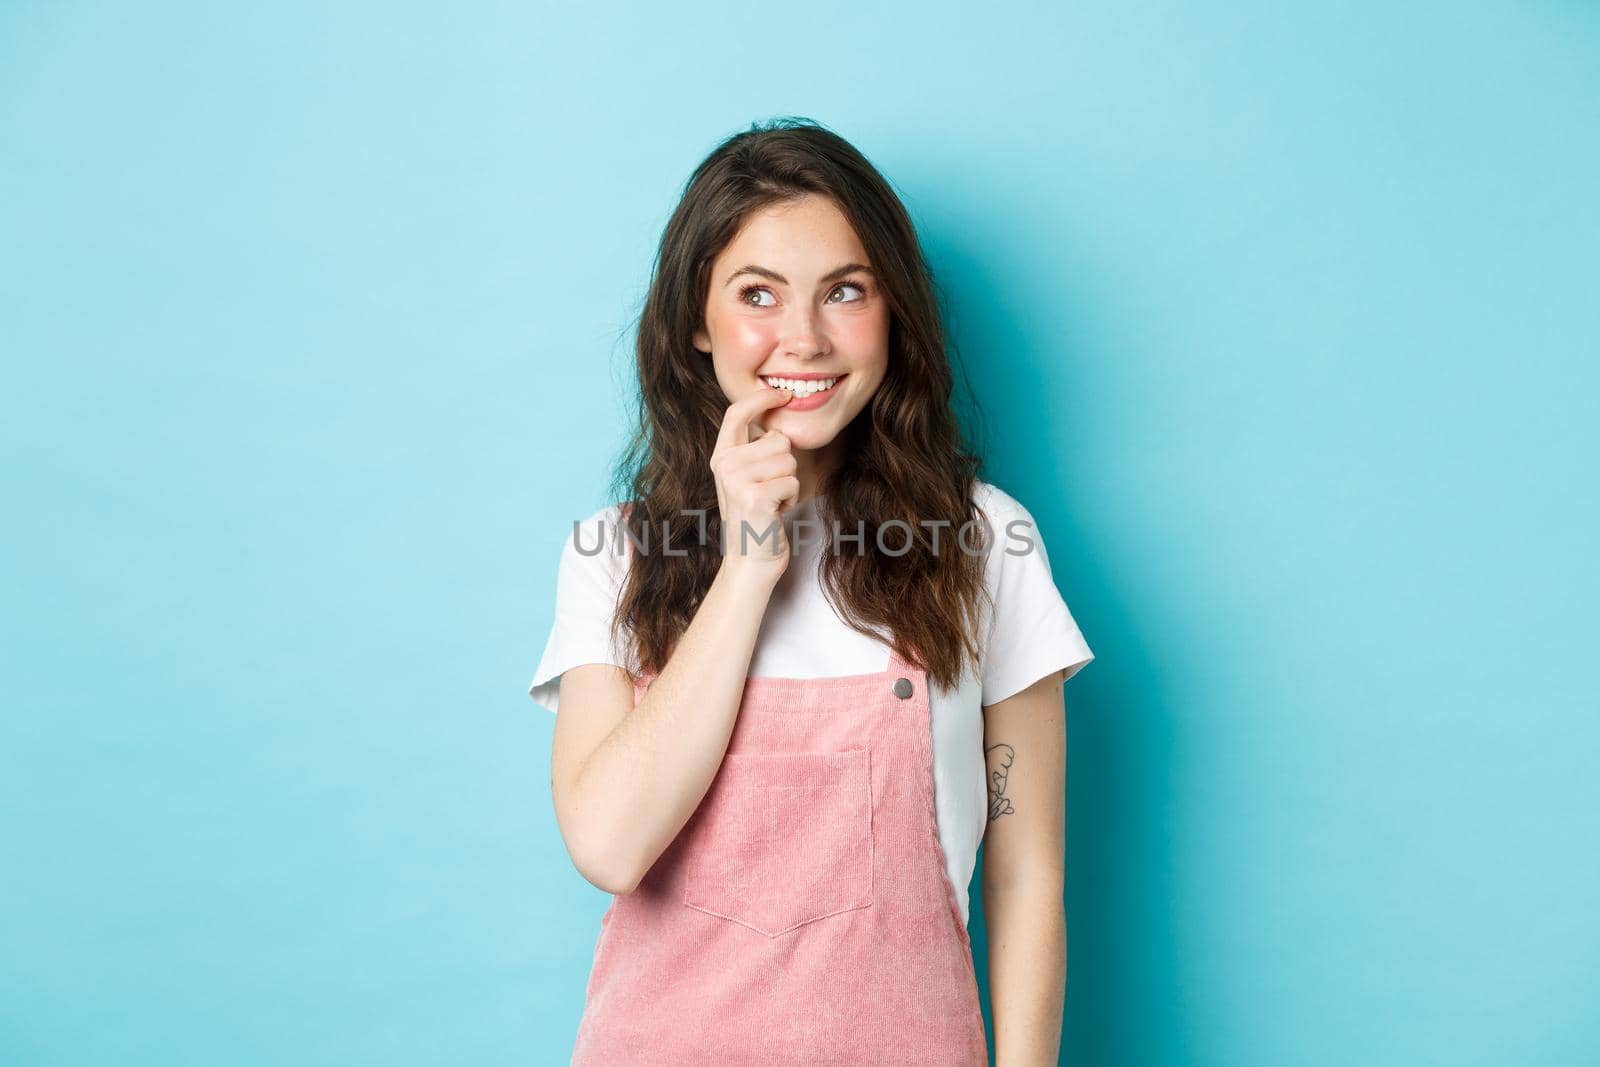 Thoughtful silly girl with cute curly hairstyle, biting finger and looking left at promo logo, smiling thinking about tasting ot trying something, standing over blue background.